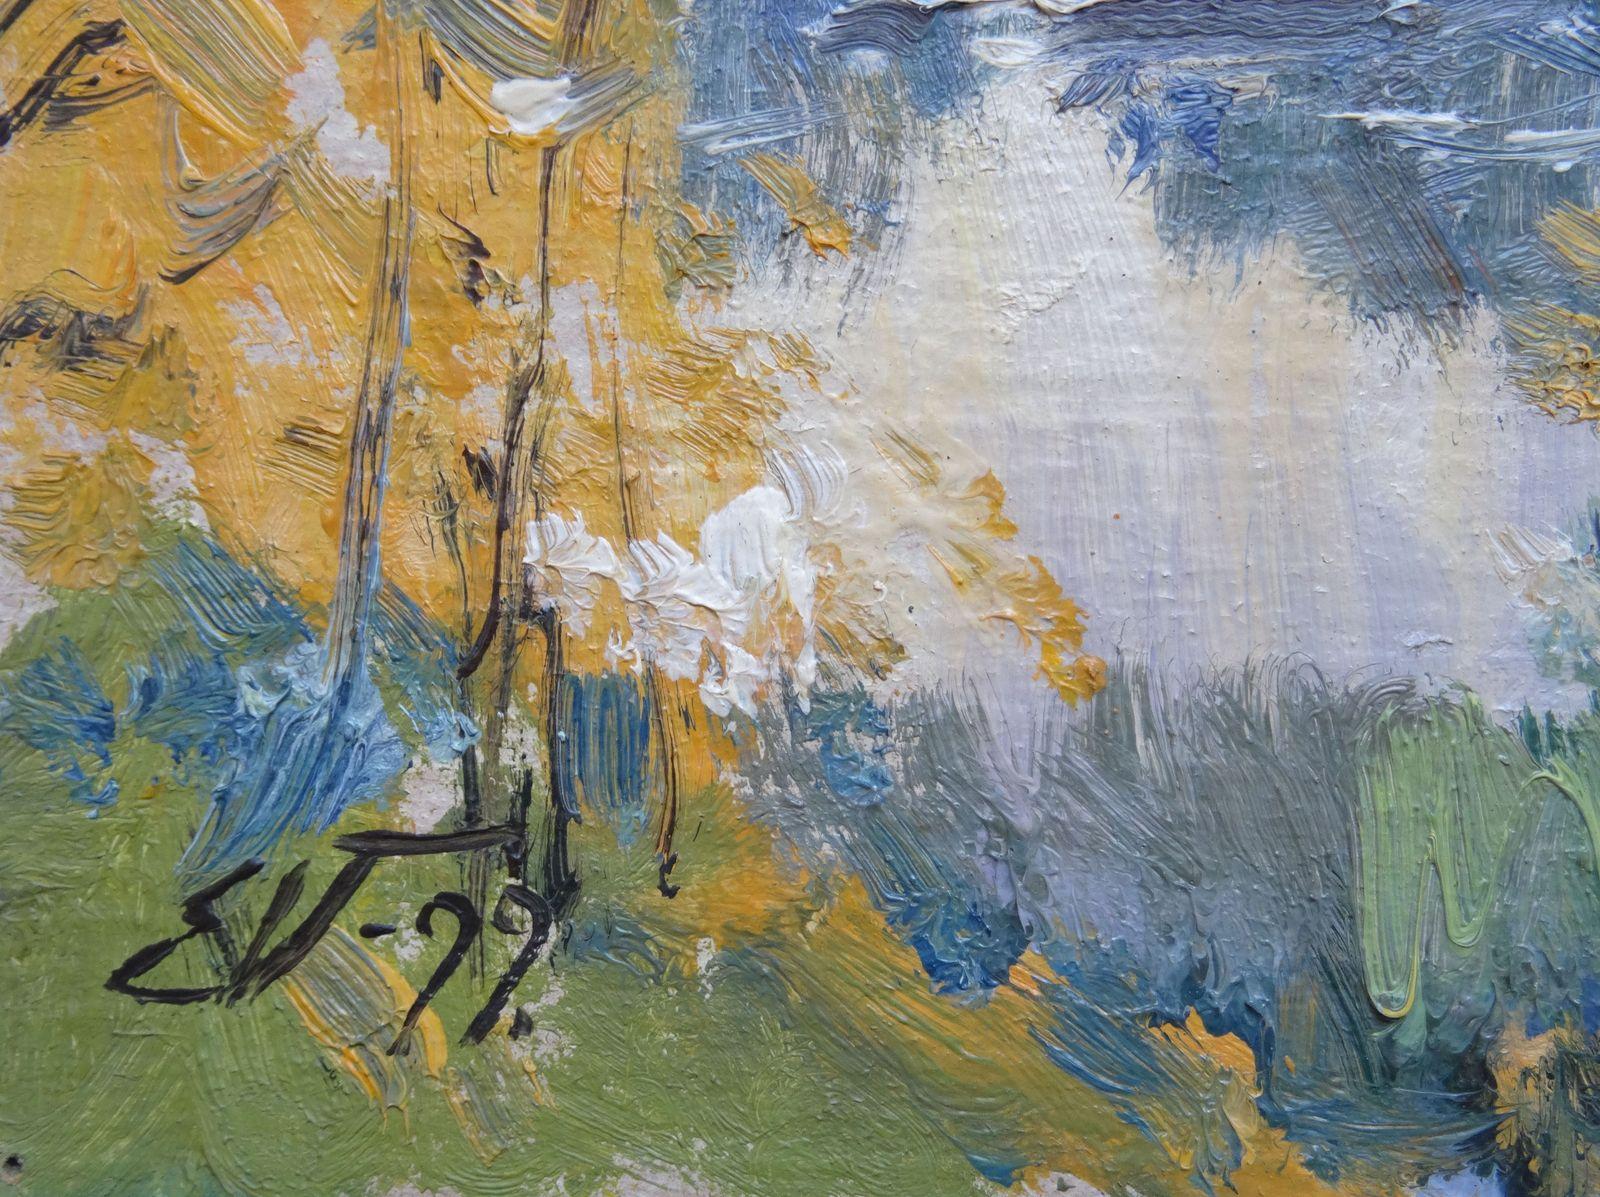 Autumn landscape. 1999. Oil on cardboard, 20x32.5 cm - Painting by Edgars Vinters